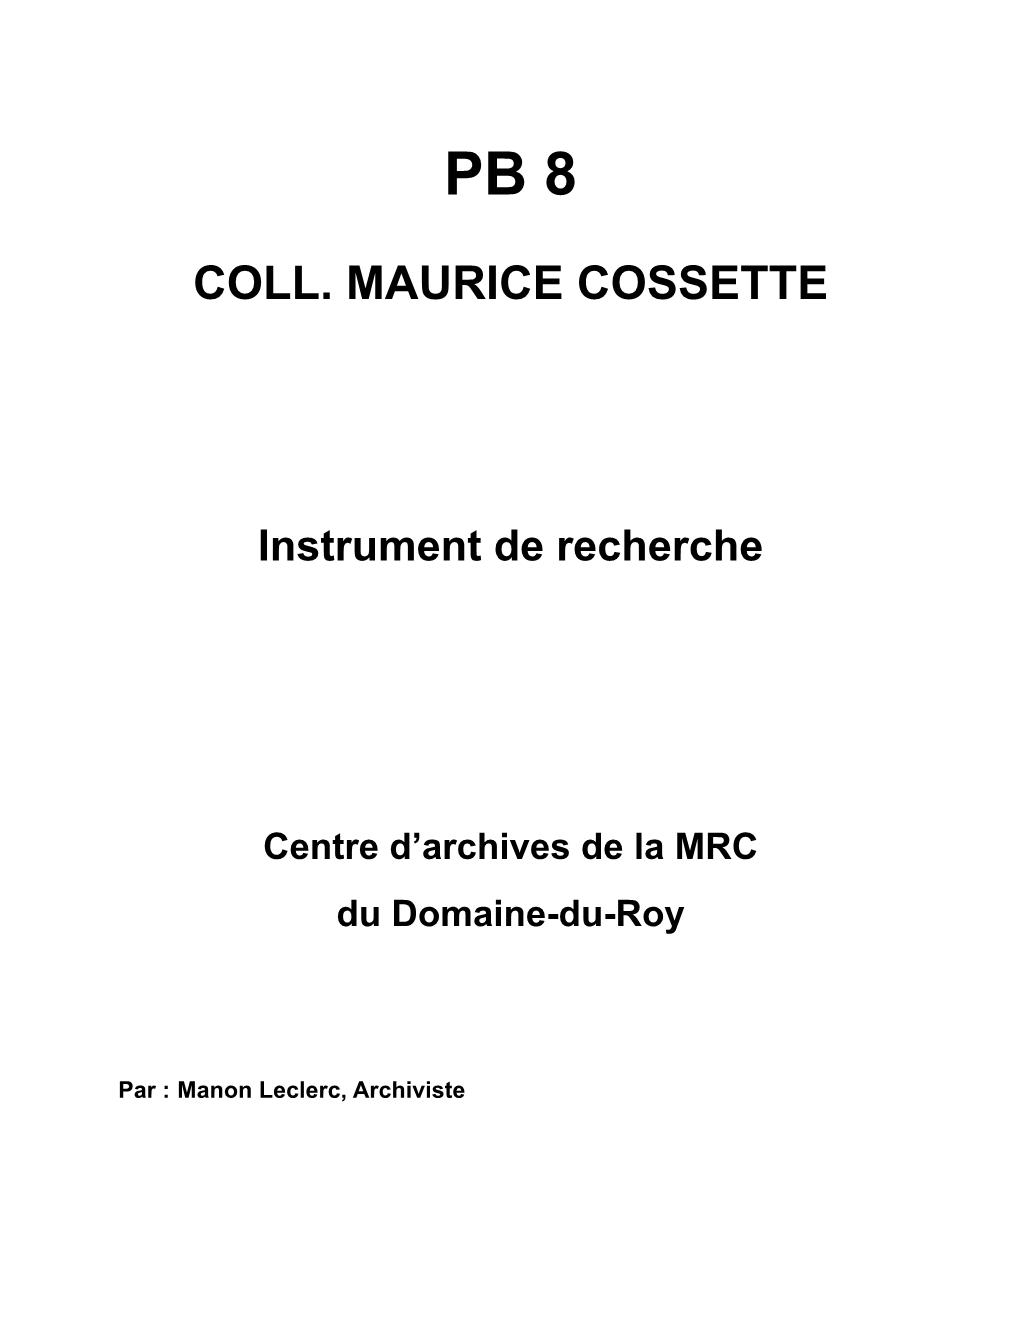 Collection Maurice Cossette